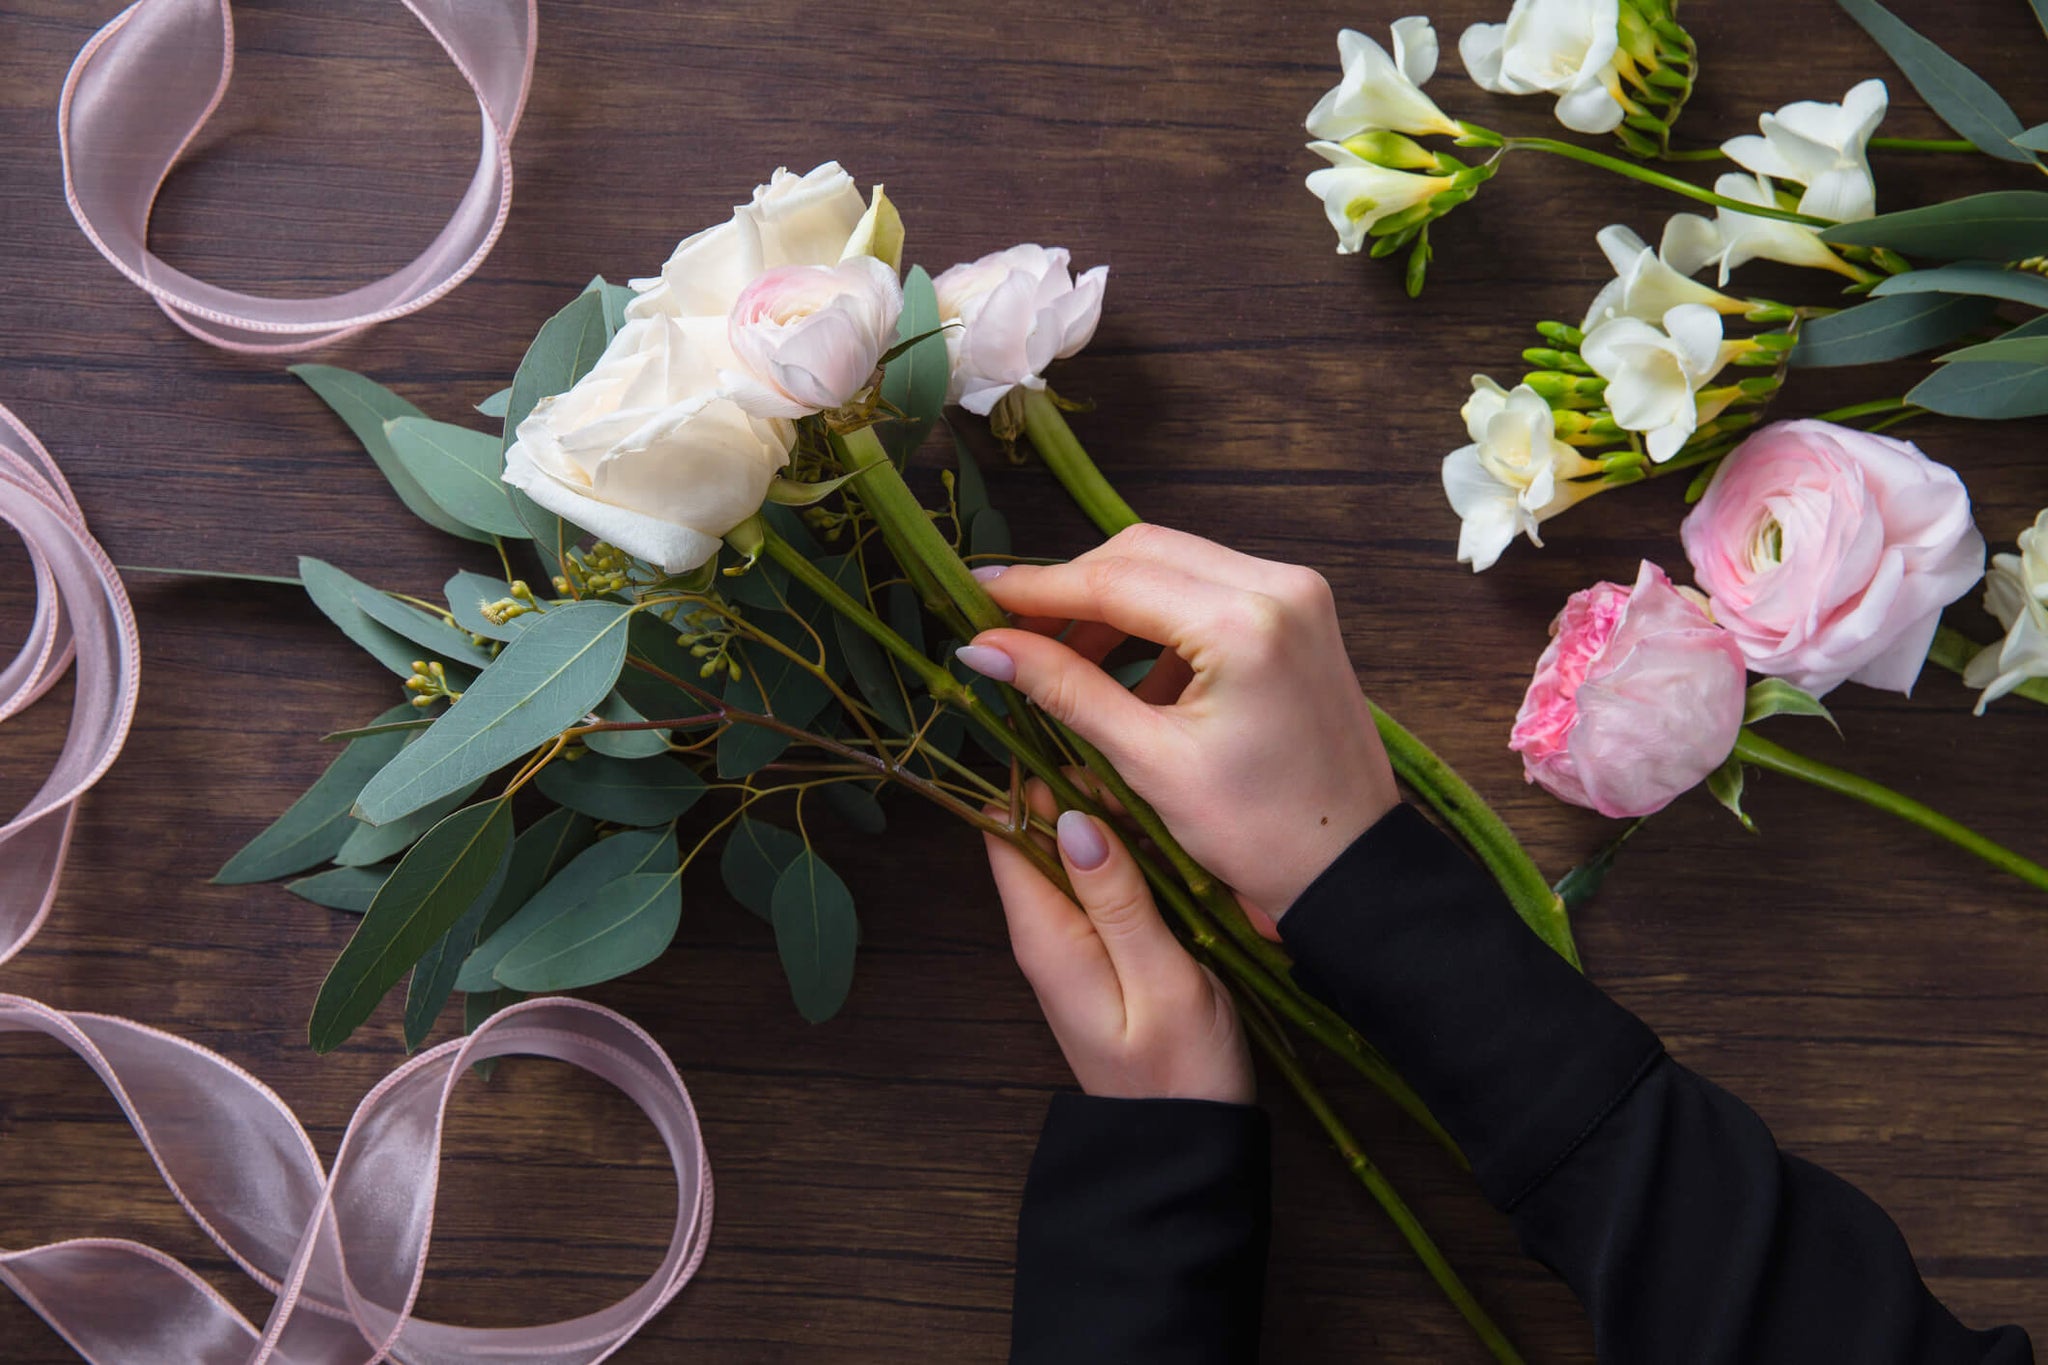 A woman arranging a mixture of rose sizes with some greenery on a wooden table.